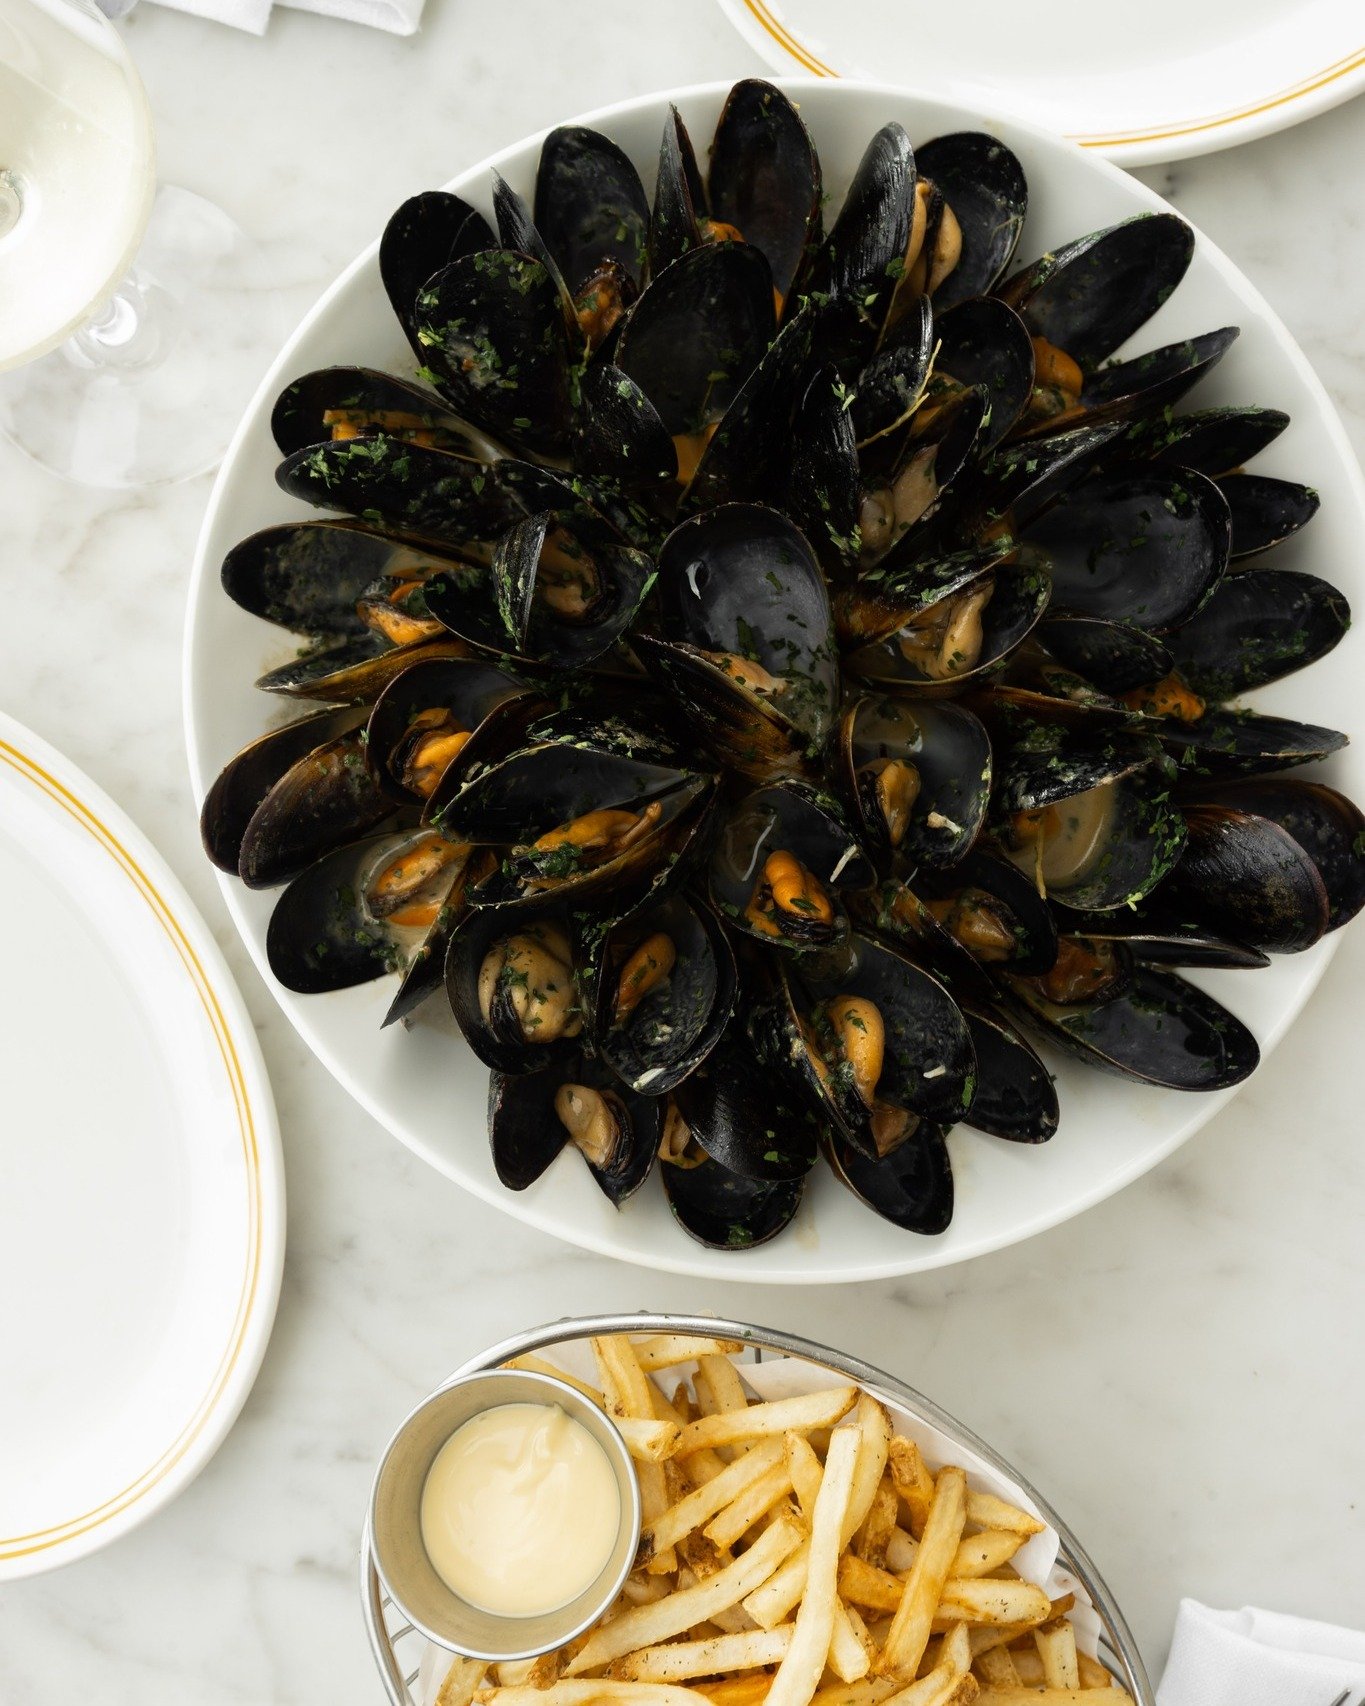 Cooler days call for our house speciality, Moules Marinieres &amp; Frites, featuring organic mussels, cream, garlic and white wine.

Perfect for lunch or dinner, paired with a delicious glass of wine.

#whalebridge